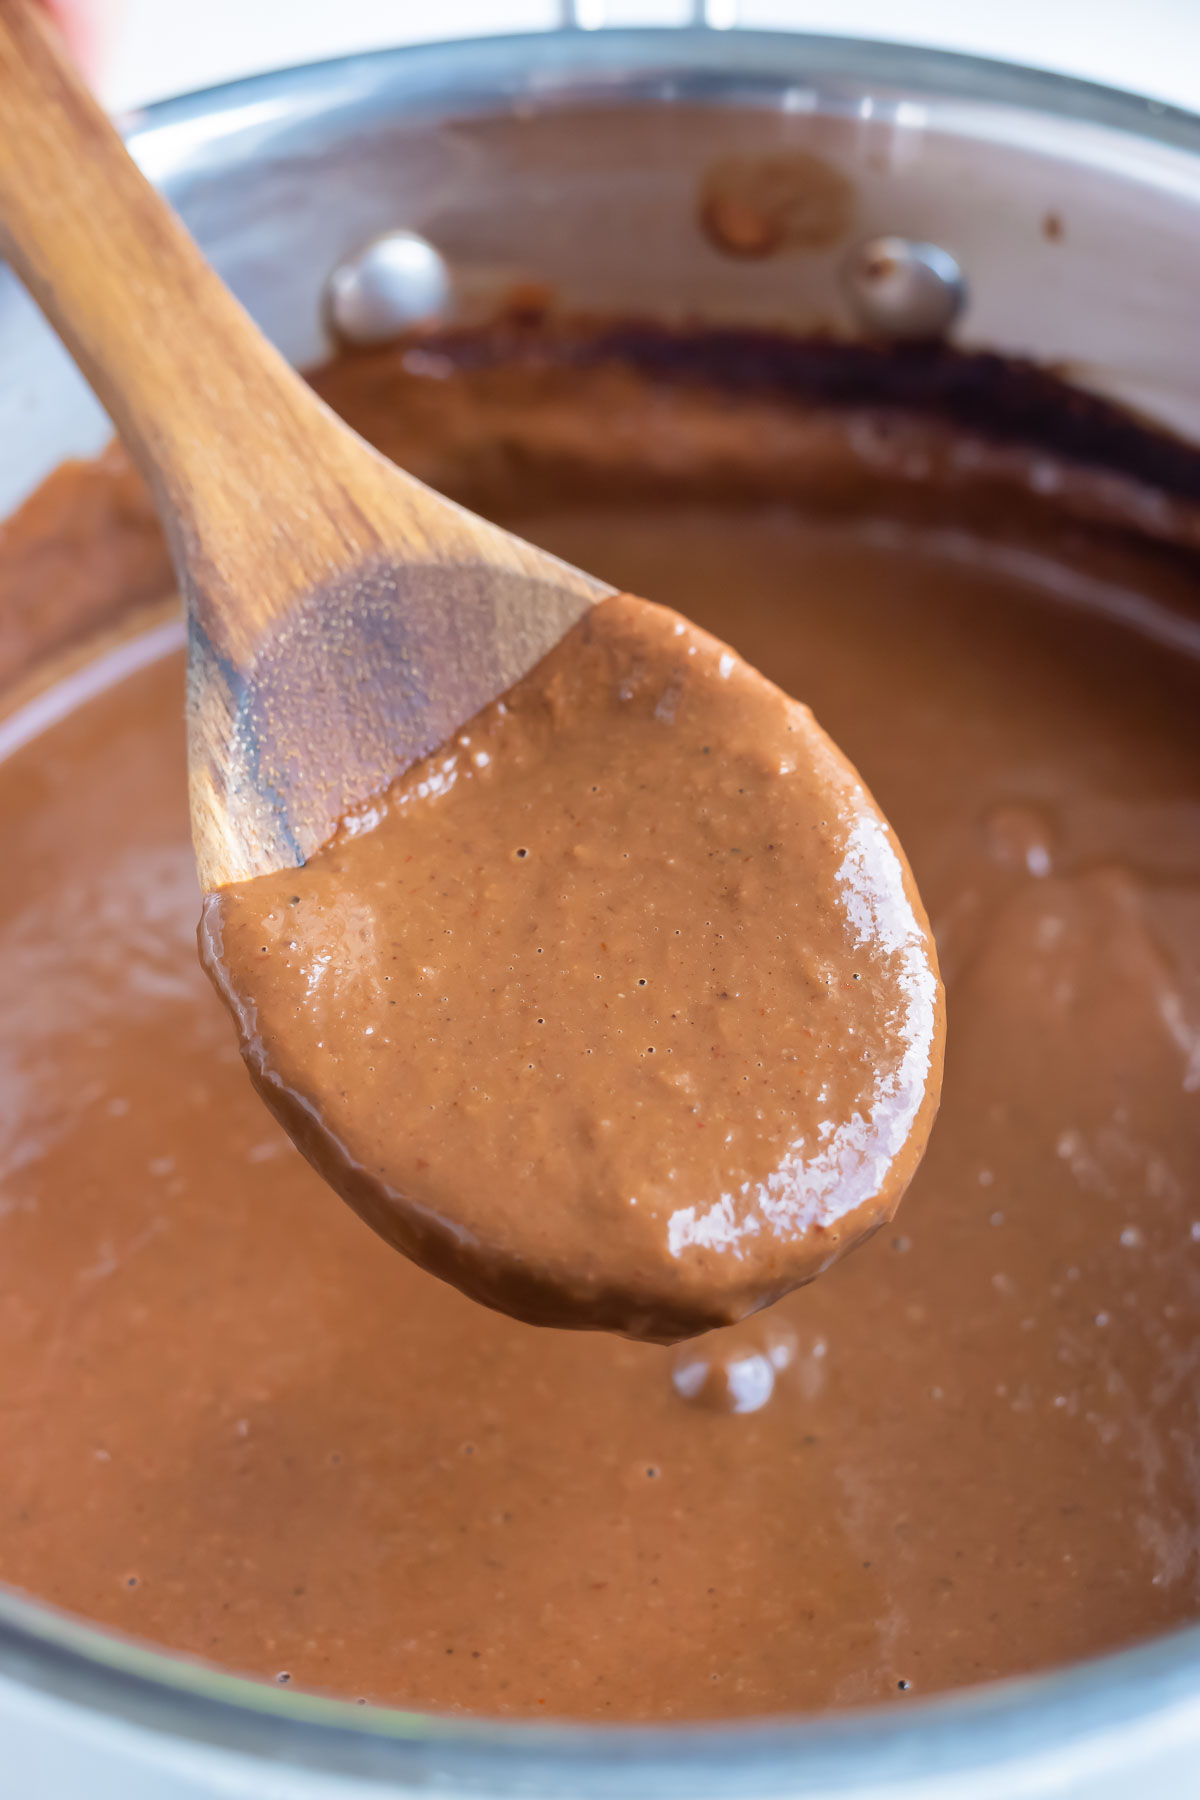 A wooden spoon is used to stir and dish authentic mole sauce.